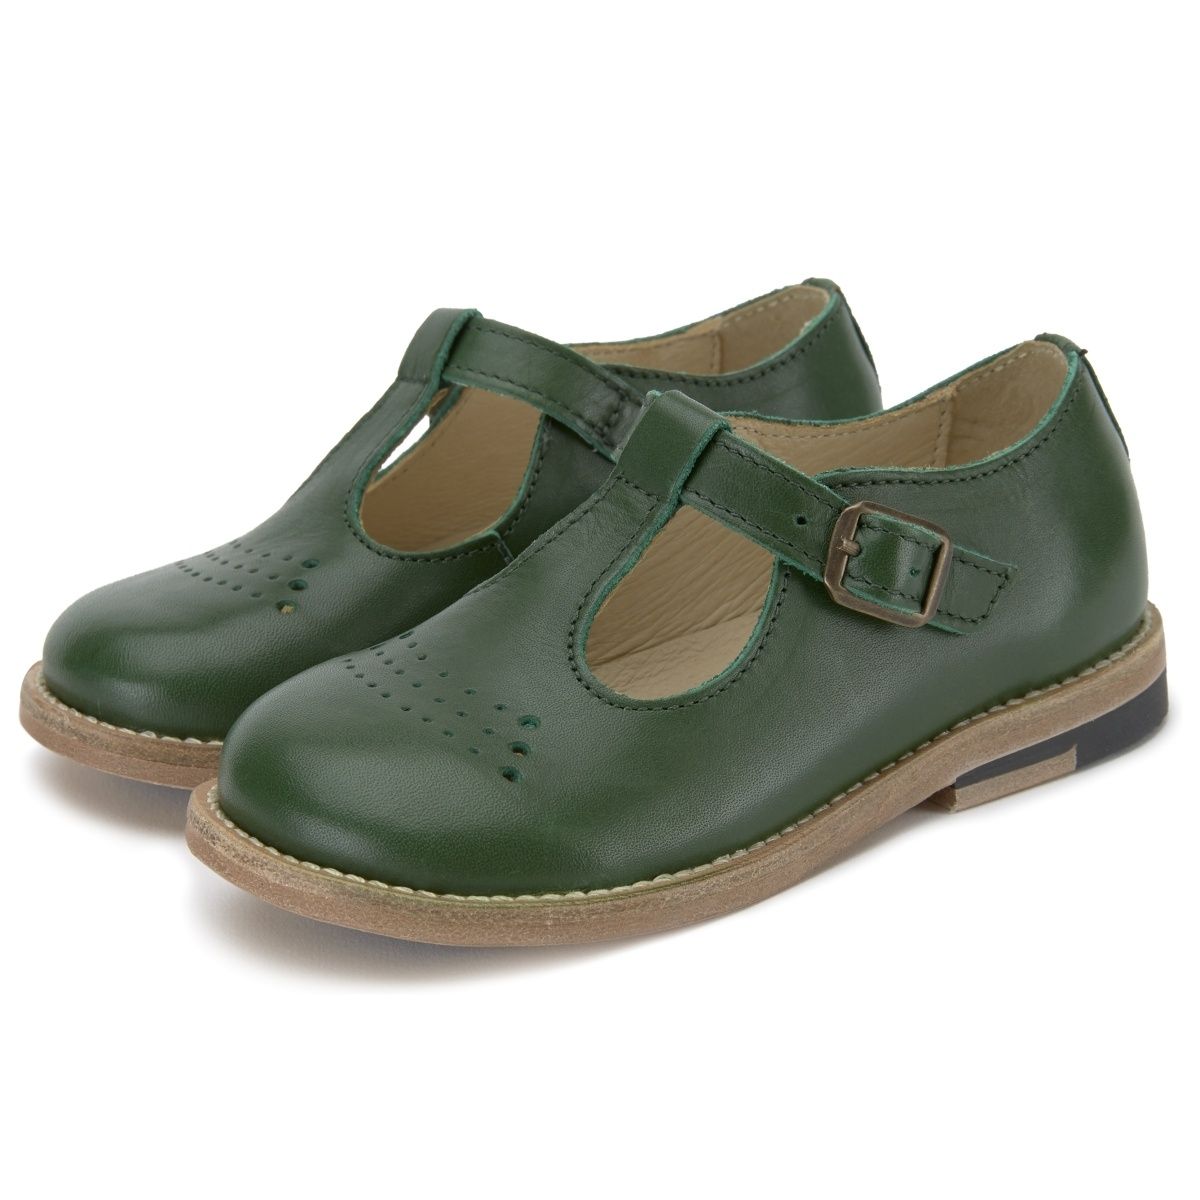 Young Soles T-bar Shoe Dottie Leather green DO305622 